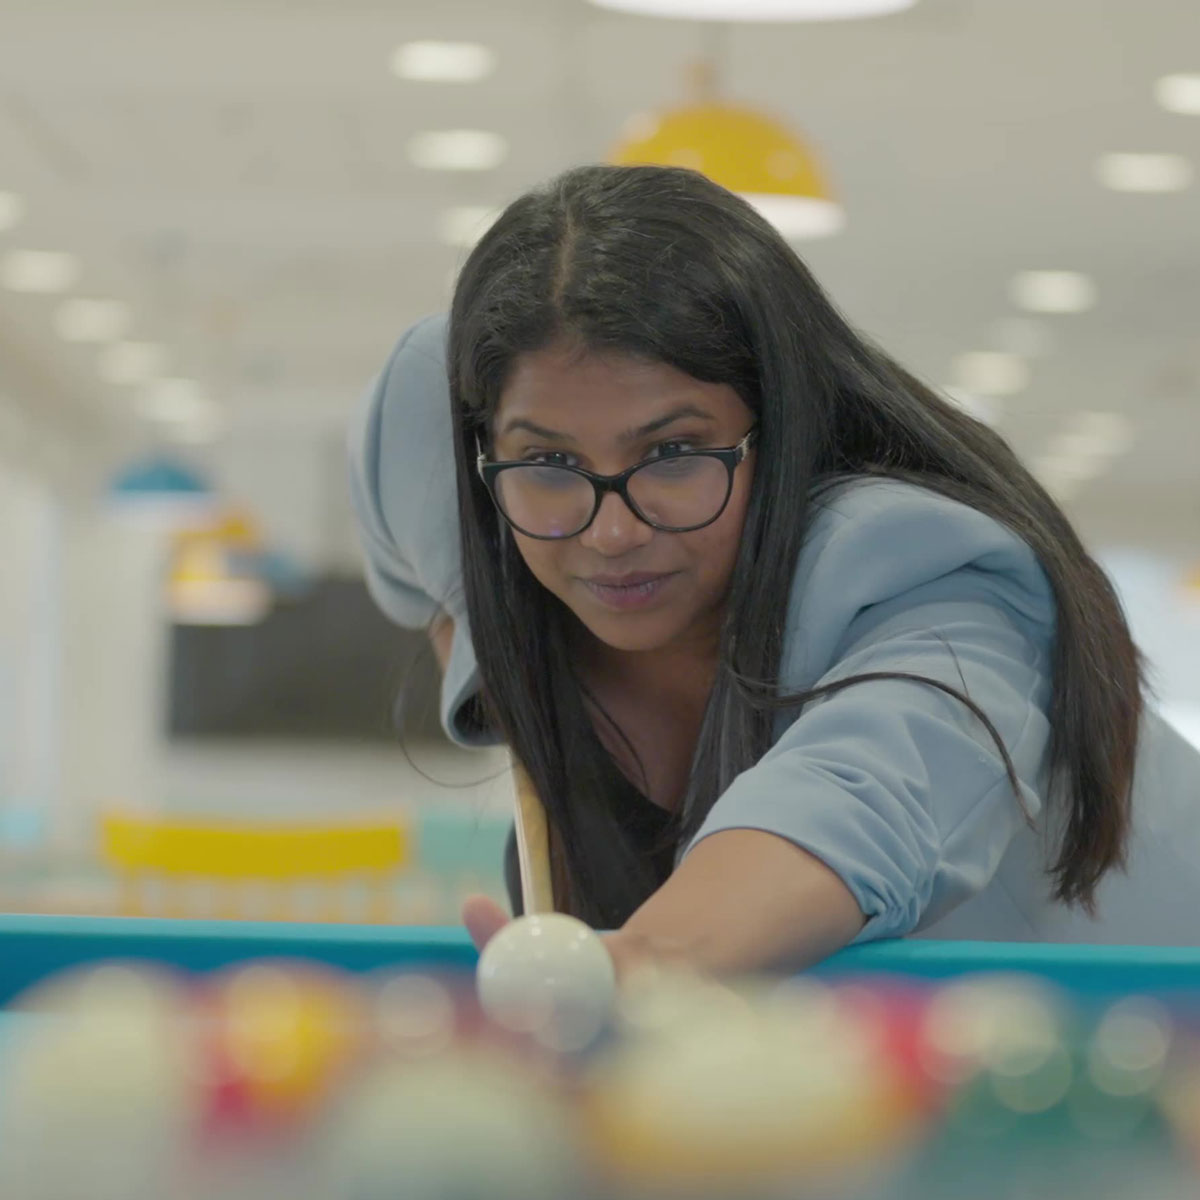 Life@Informa employer brand campaign for Informa with employee playing pool